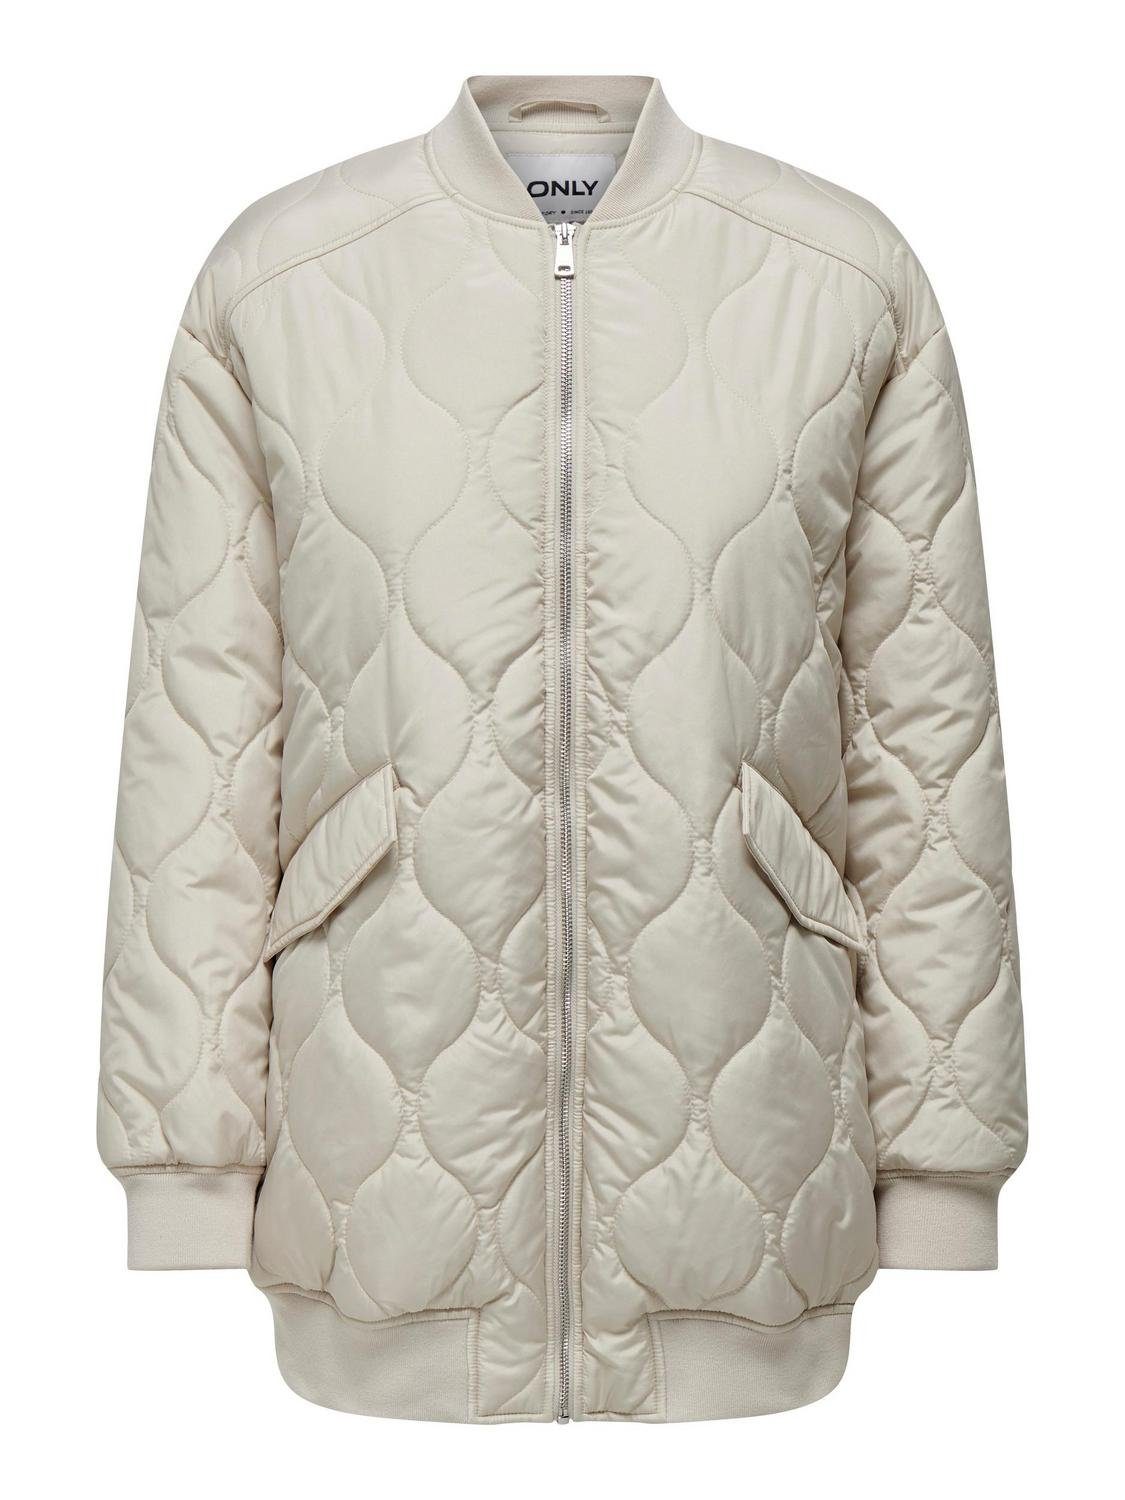 ONLTINA ONLY JACKET LONG OTW Outdoorjacke QUILTED